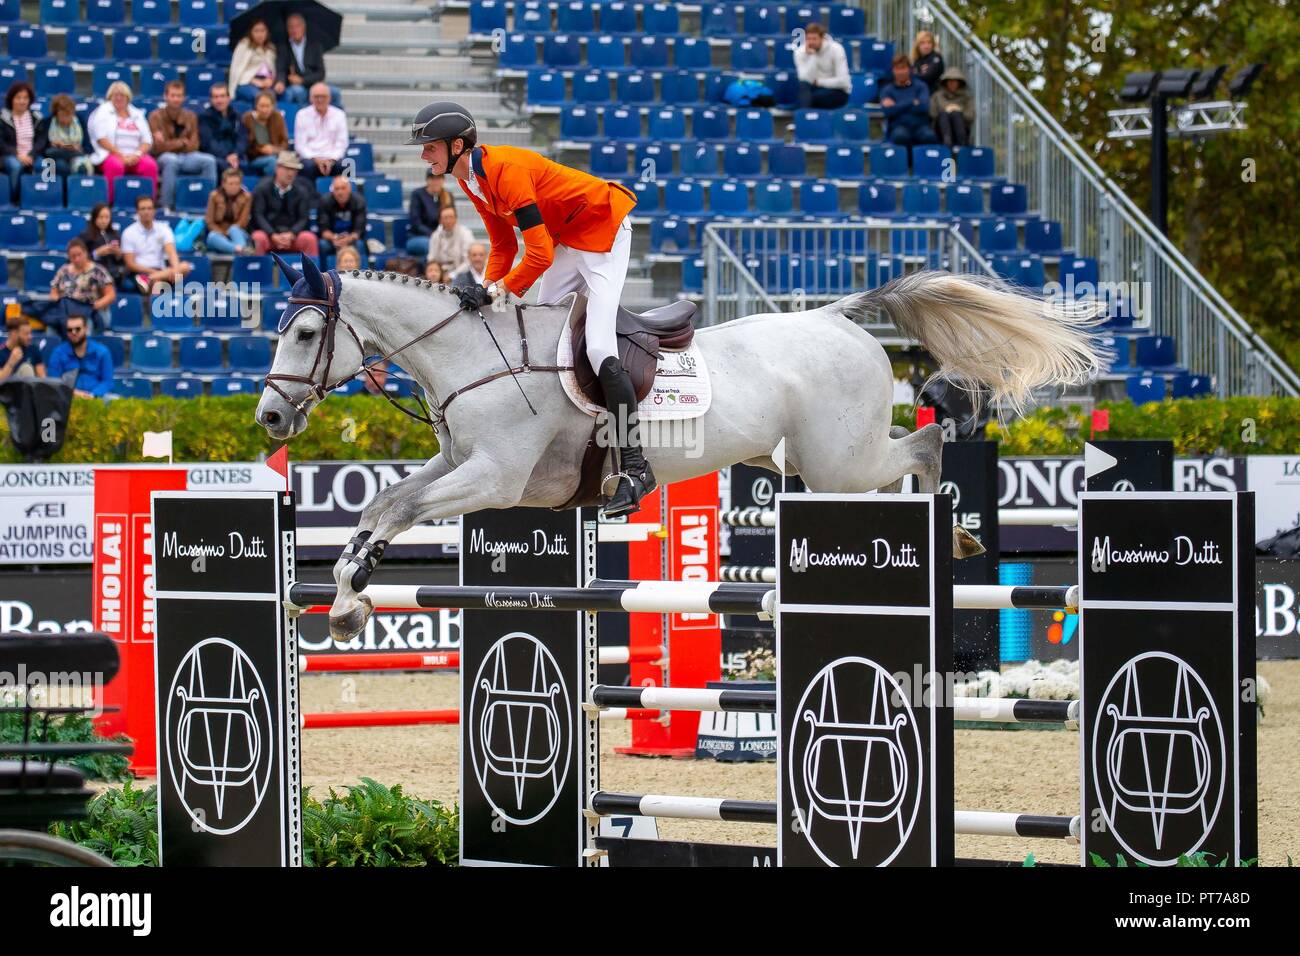 Barcellona, Spagna. Il 7 ottobre 2018. Vincitore. Frank Schuttert. NED. Equitazione Claus Dieter. Caixa Bank Trophy. Longines FEI Jumping Nations Cup finale. Showjumping. Barcellona. Spagna. Il giorno 3. 07/10/2018. Foto Stock